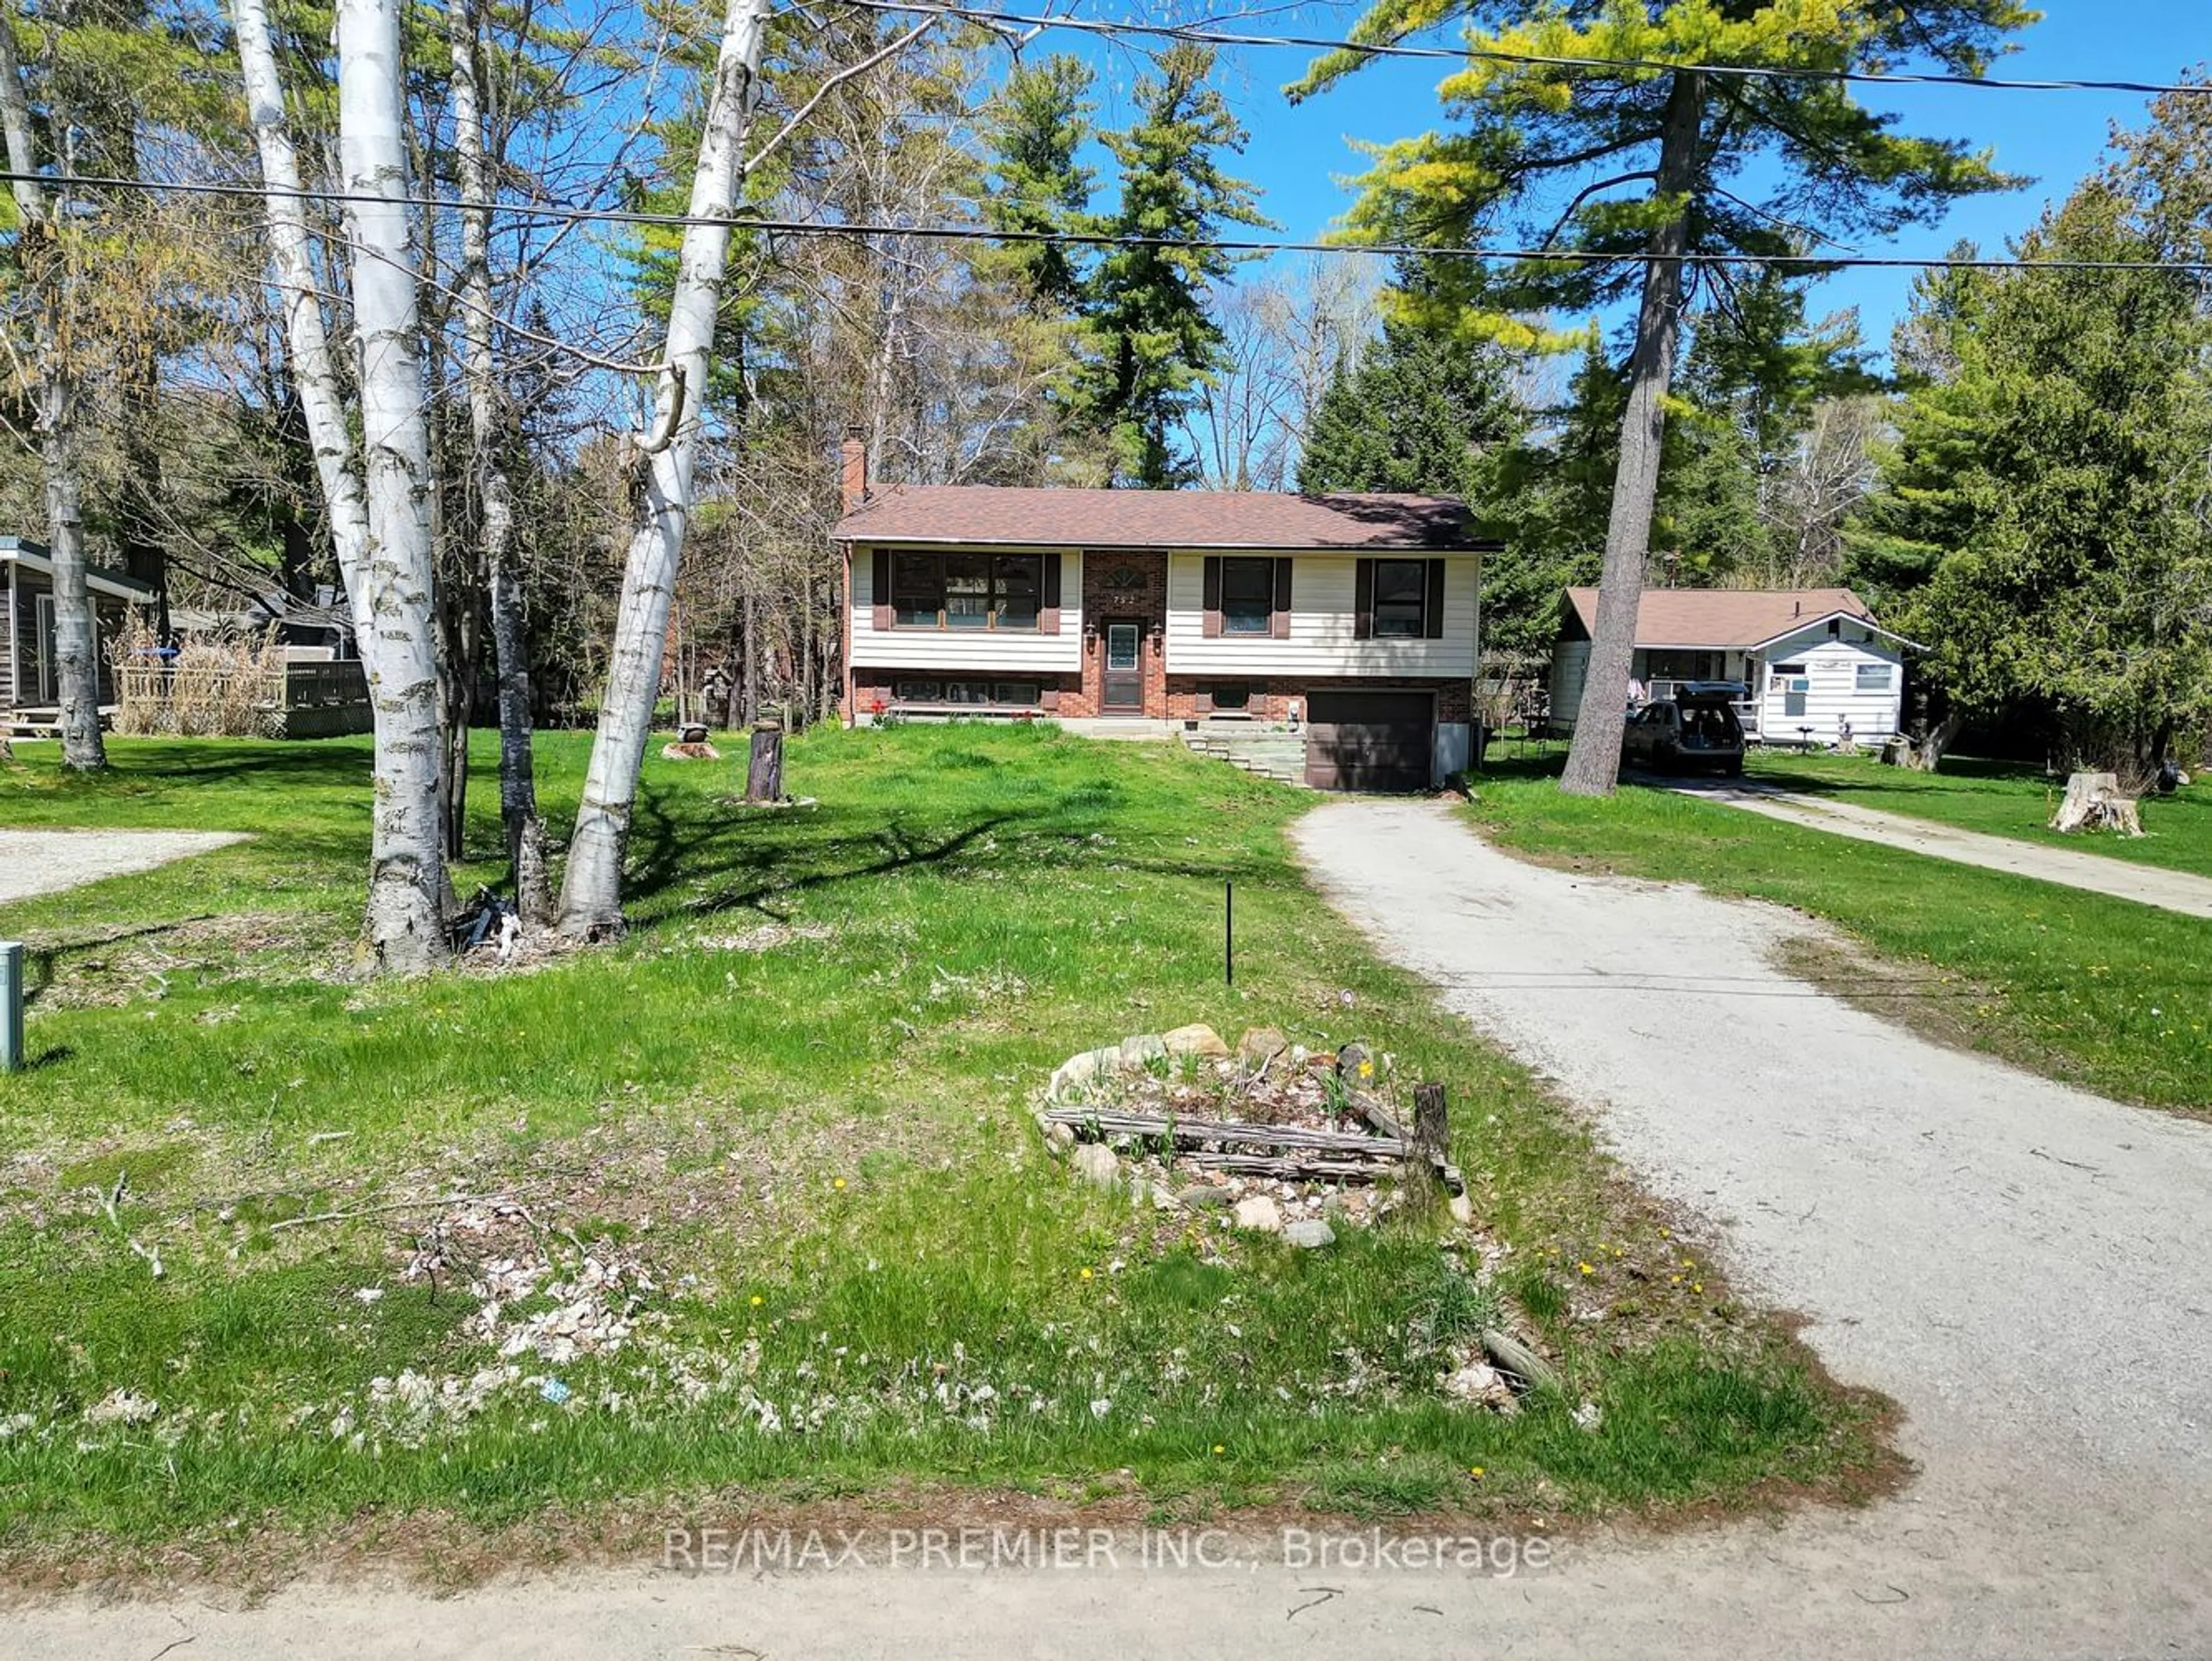 Frontside or backside of a home for 752 Pinegrove Ave, Innisfil Ontario L0L 2M0